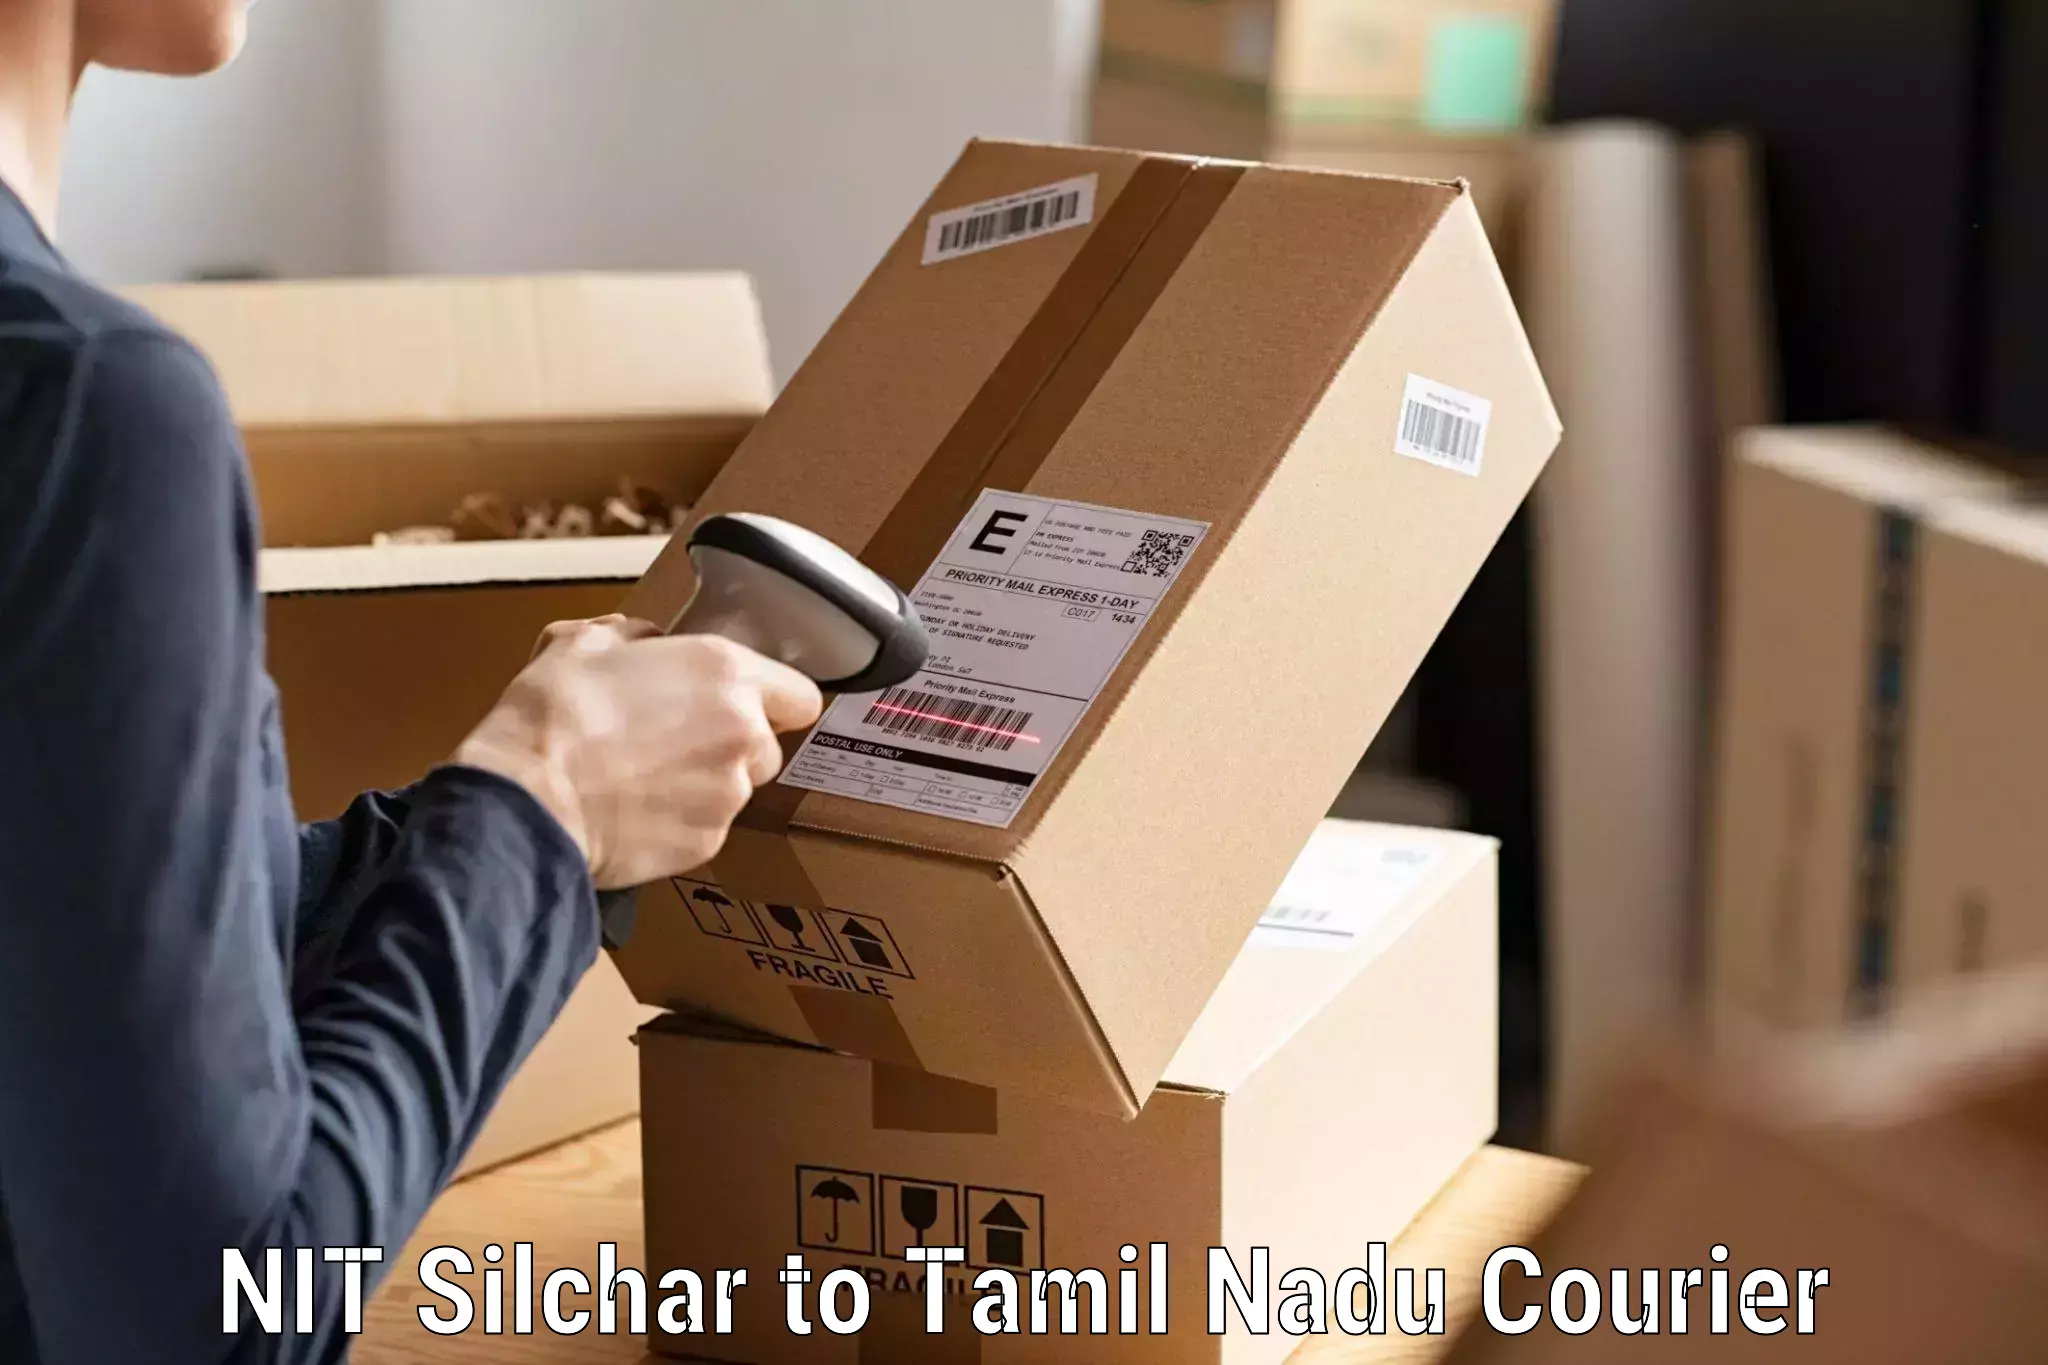 Business shipping needs NIT Silchar to Shanmugha Arts Science Technology and Research Academy Thanjavur